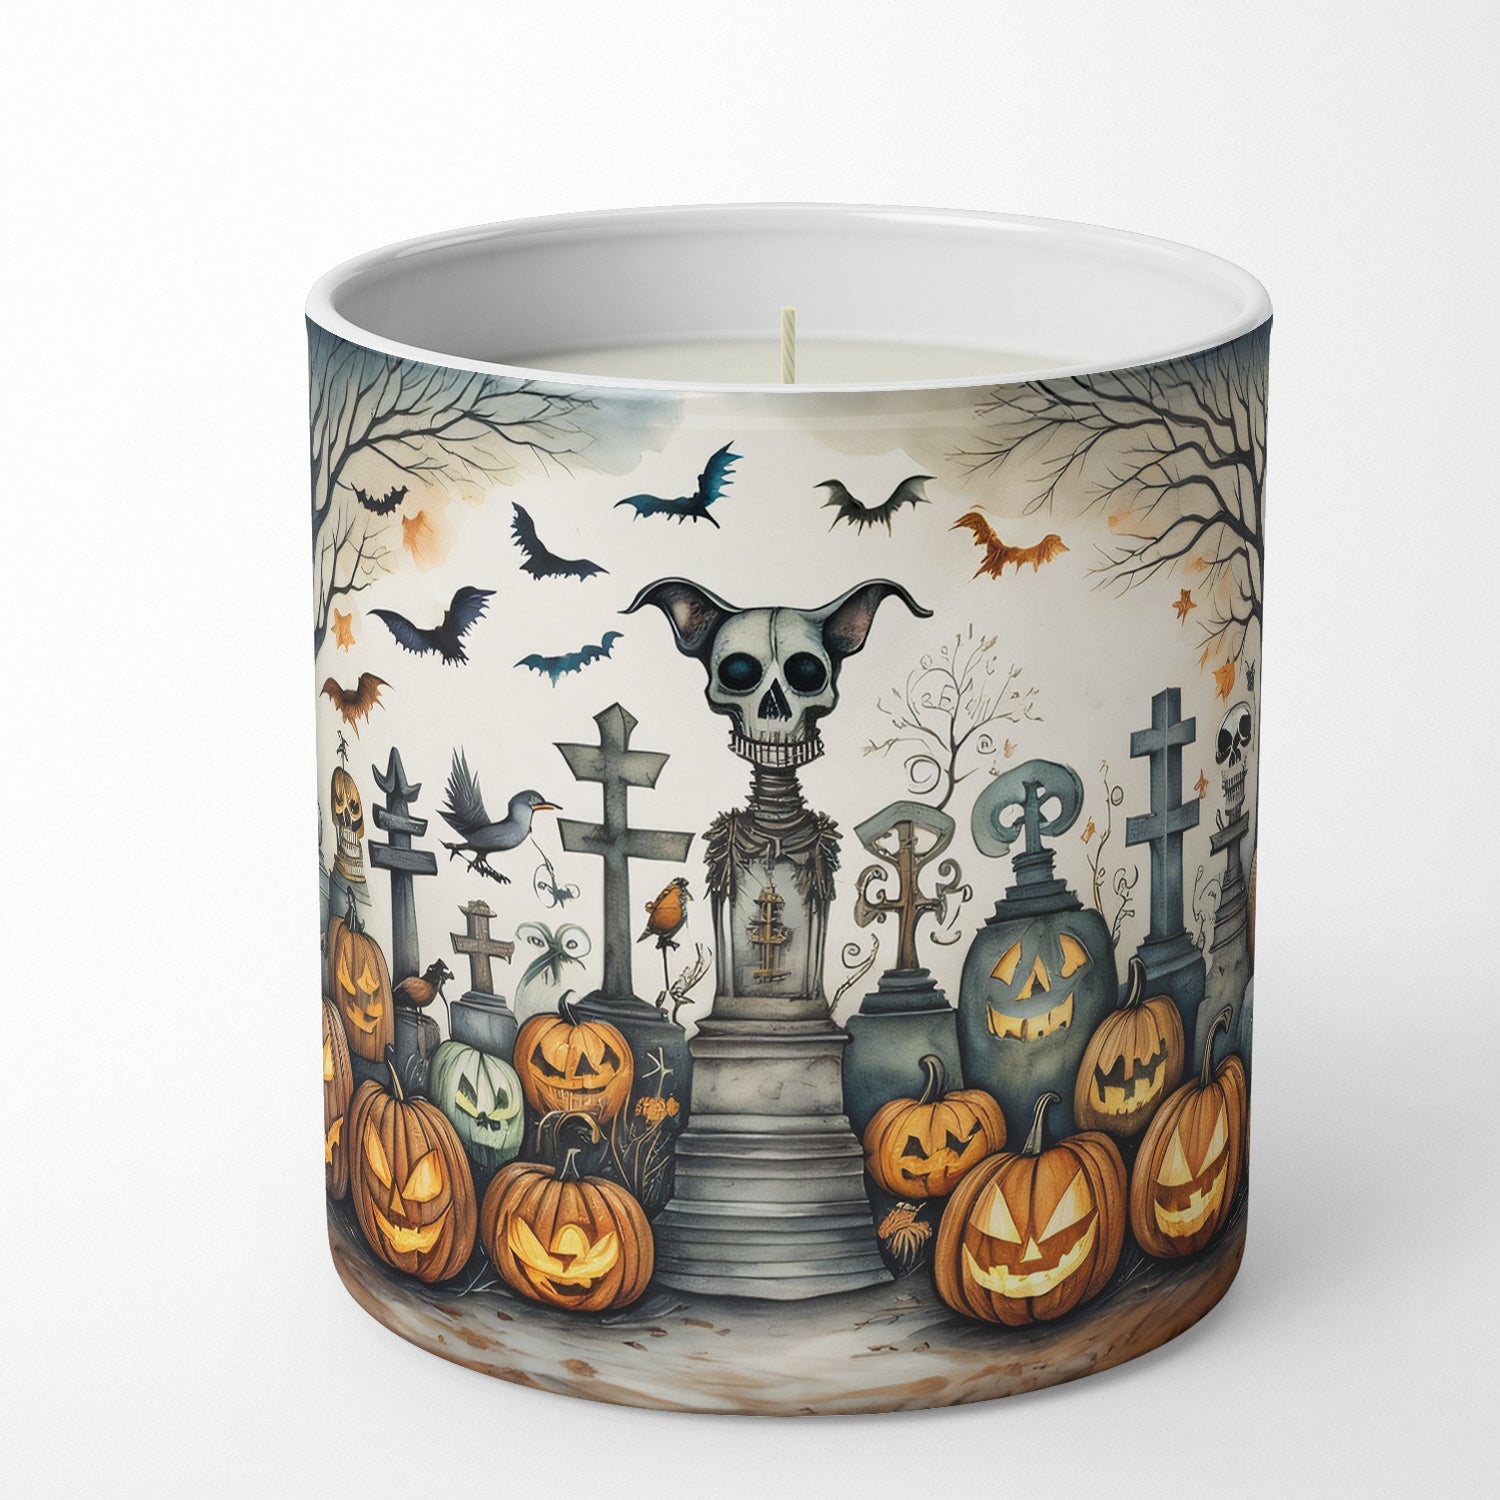 Buy this Pet Cemetery Spooky Halloween Decorative Soy Candle